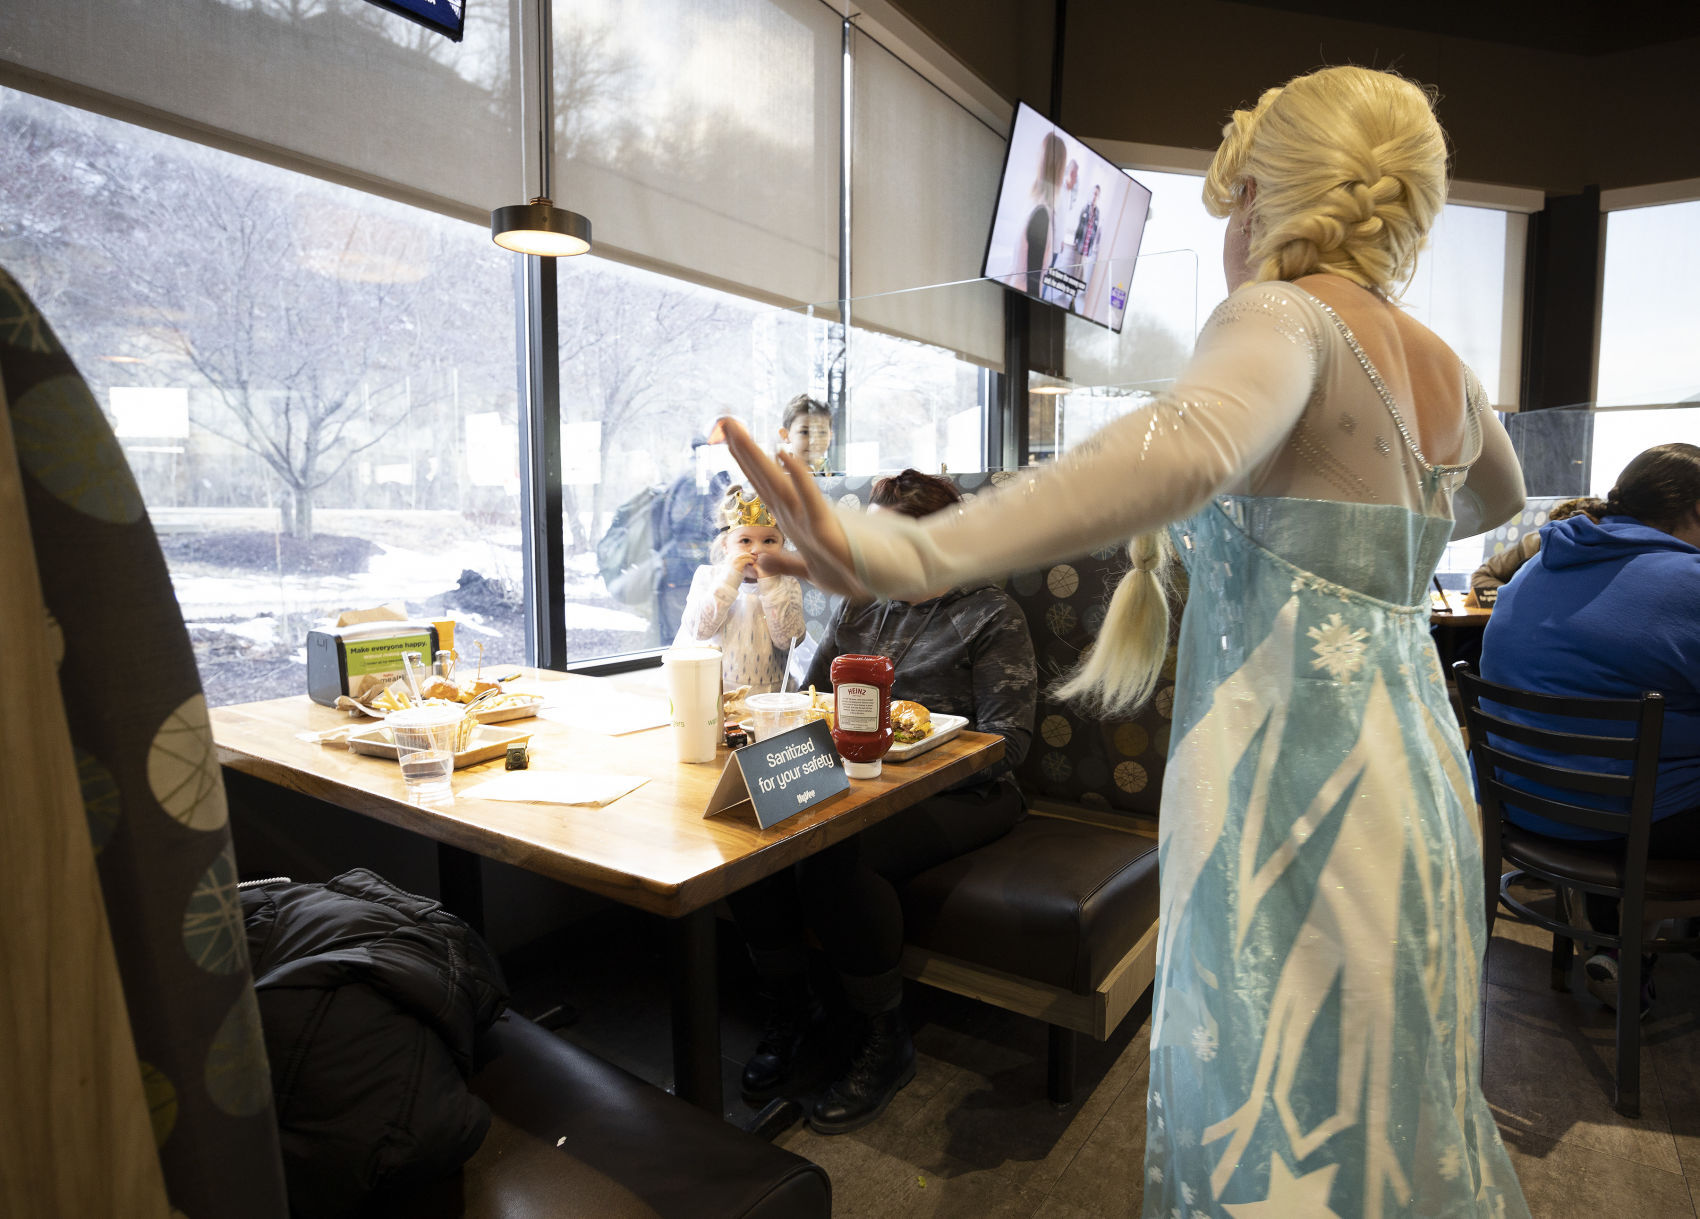 Traci Yeo, as Elsa, and owner of Royal T Princesses and Superheroes, sings to customers at Wahlburgers in Hy-Vee on South Locust Street in Dubuque on Friday, March 11, 2022.    PHOTO CREDIT: Stephen Gassman